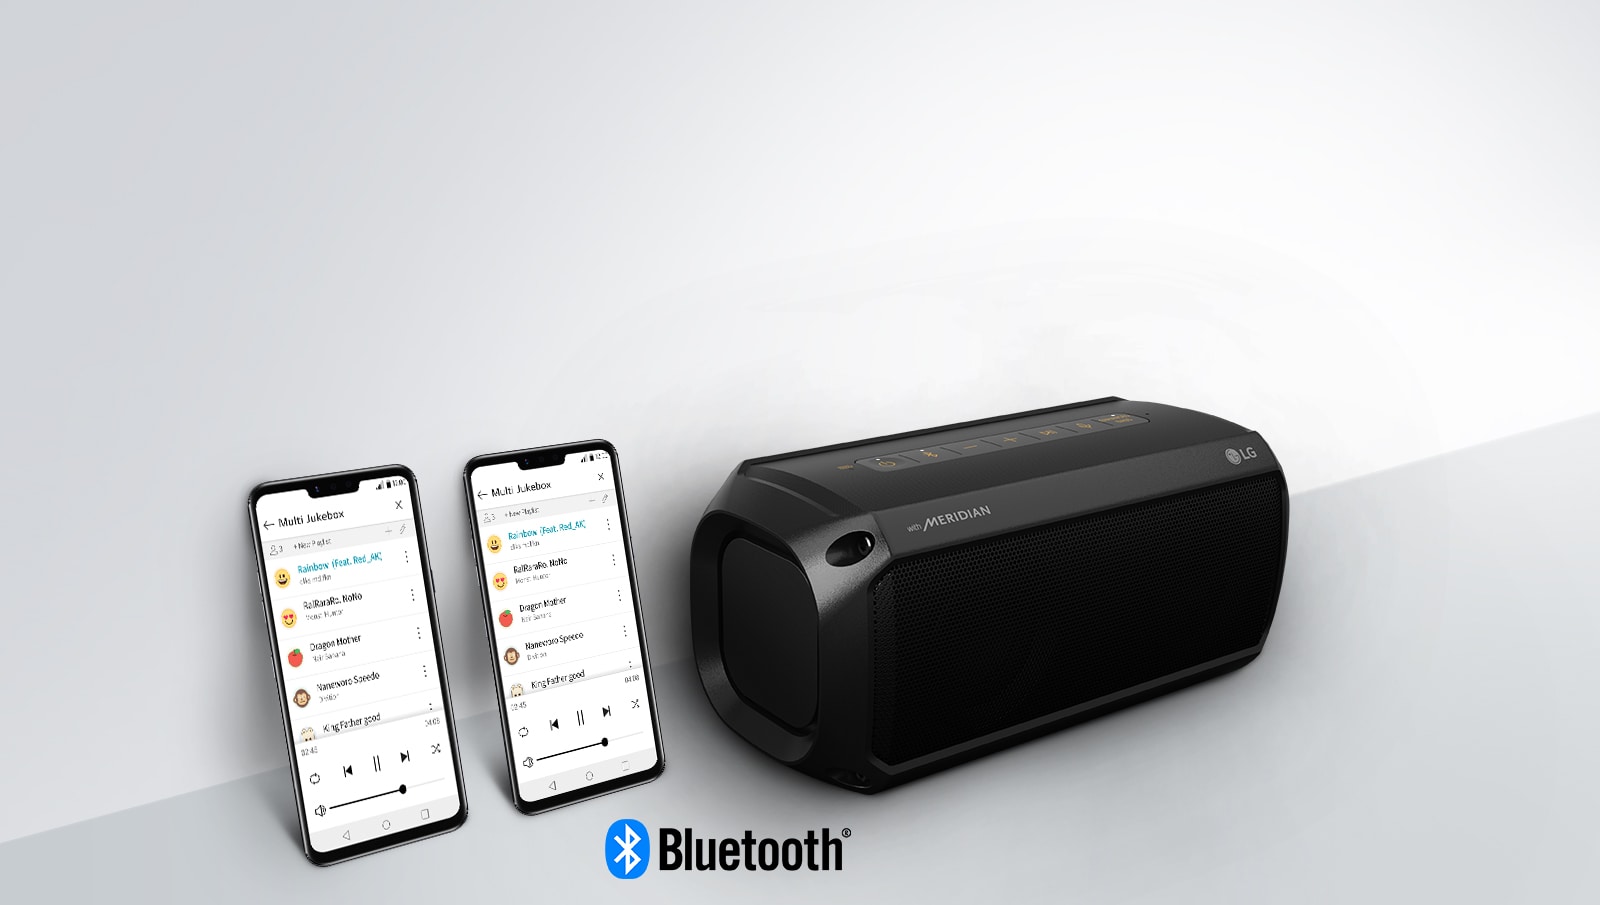 Share the Playlist with Multi Bluetooth